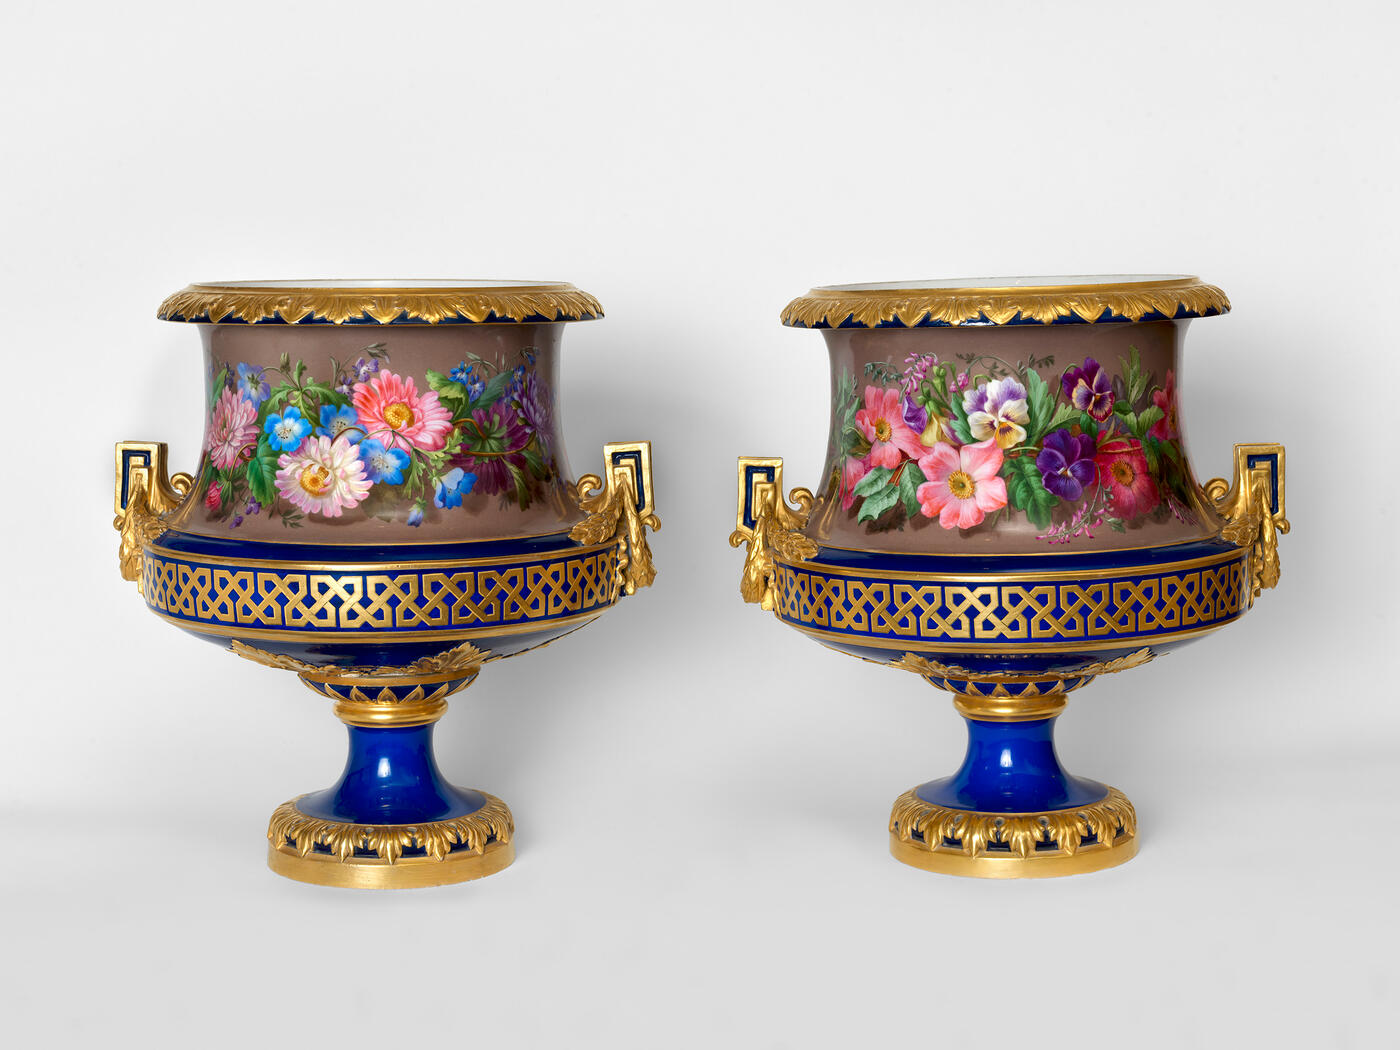 A Rare Pair of Imperial Porcelain Vases